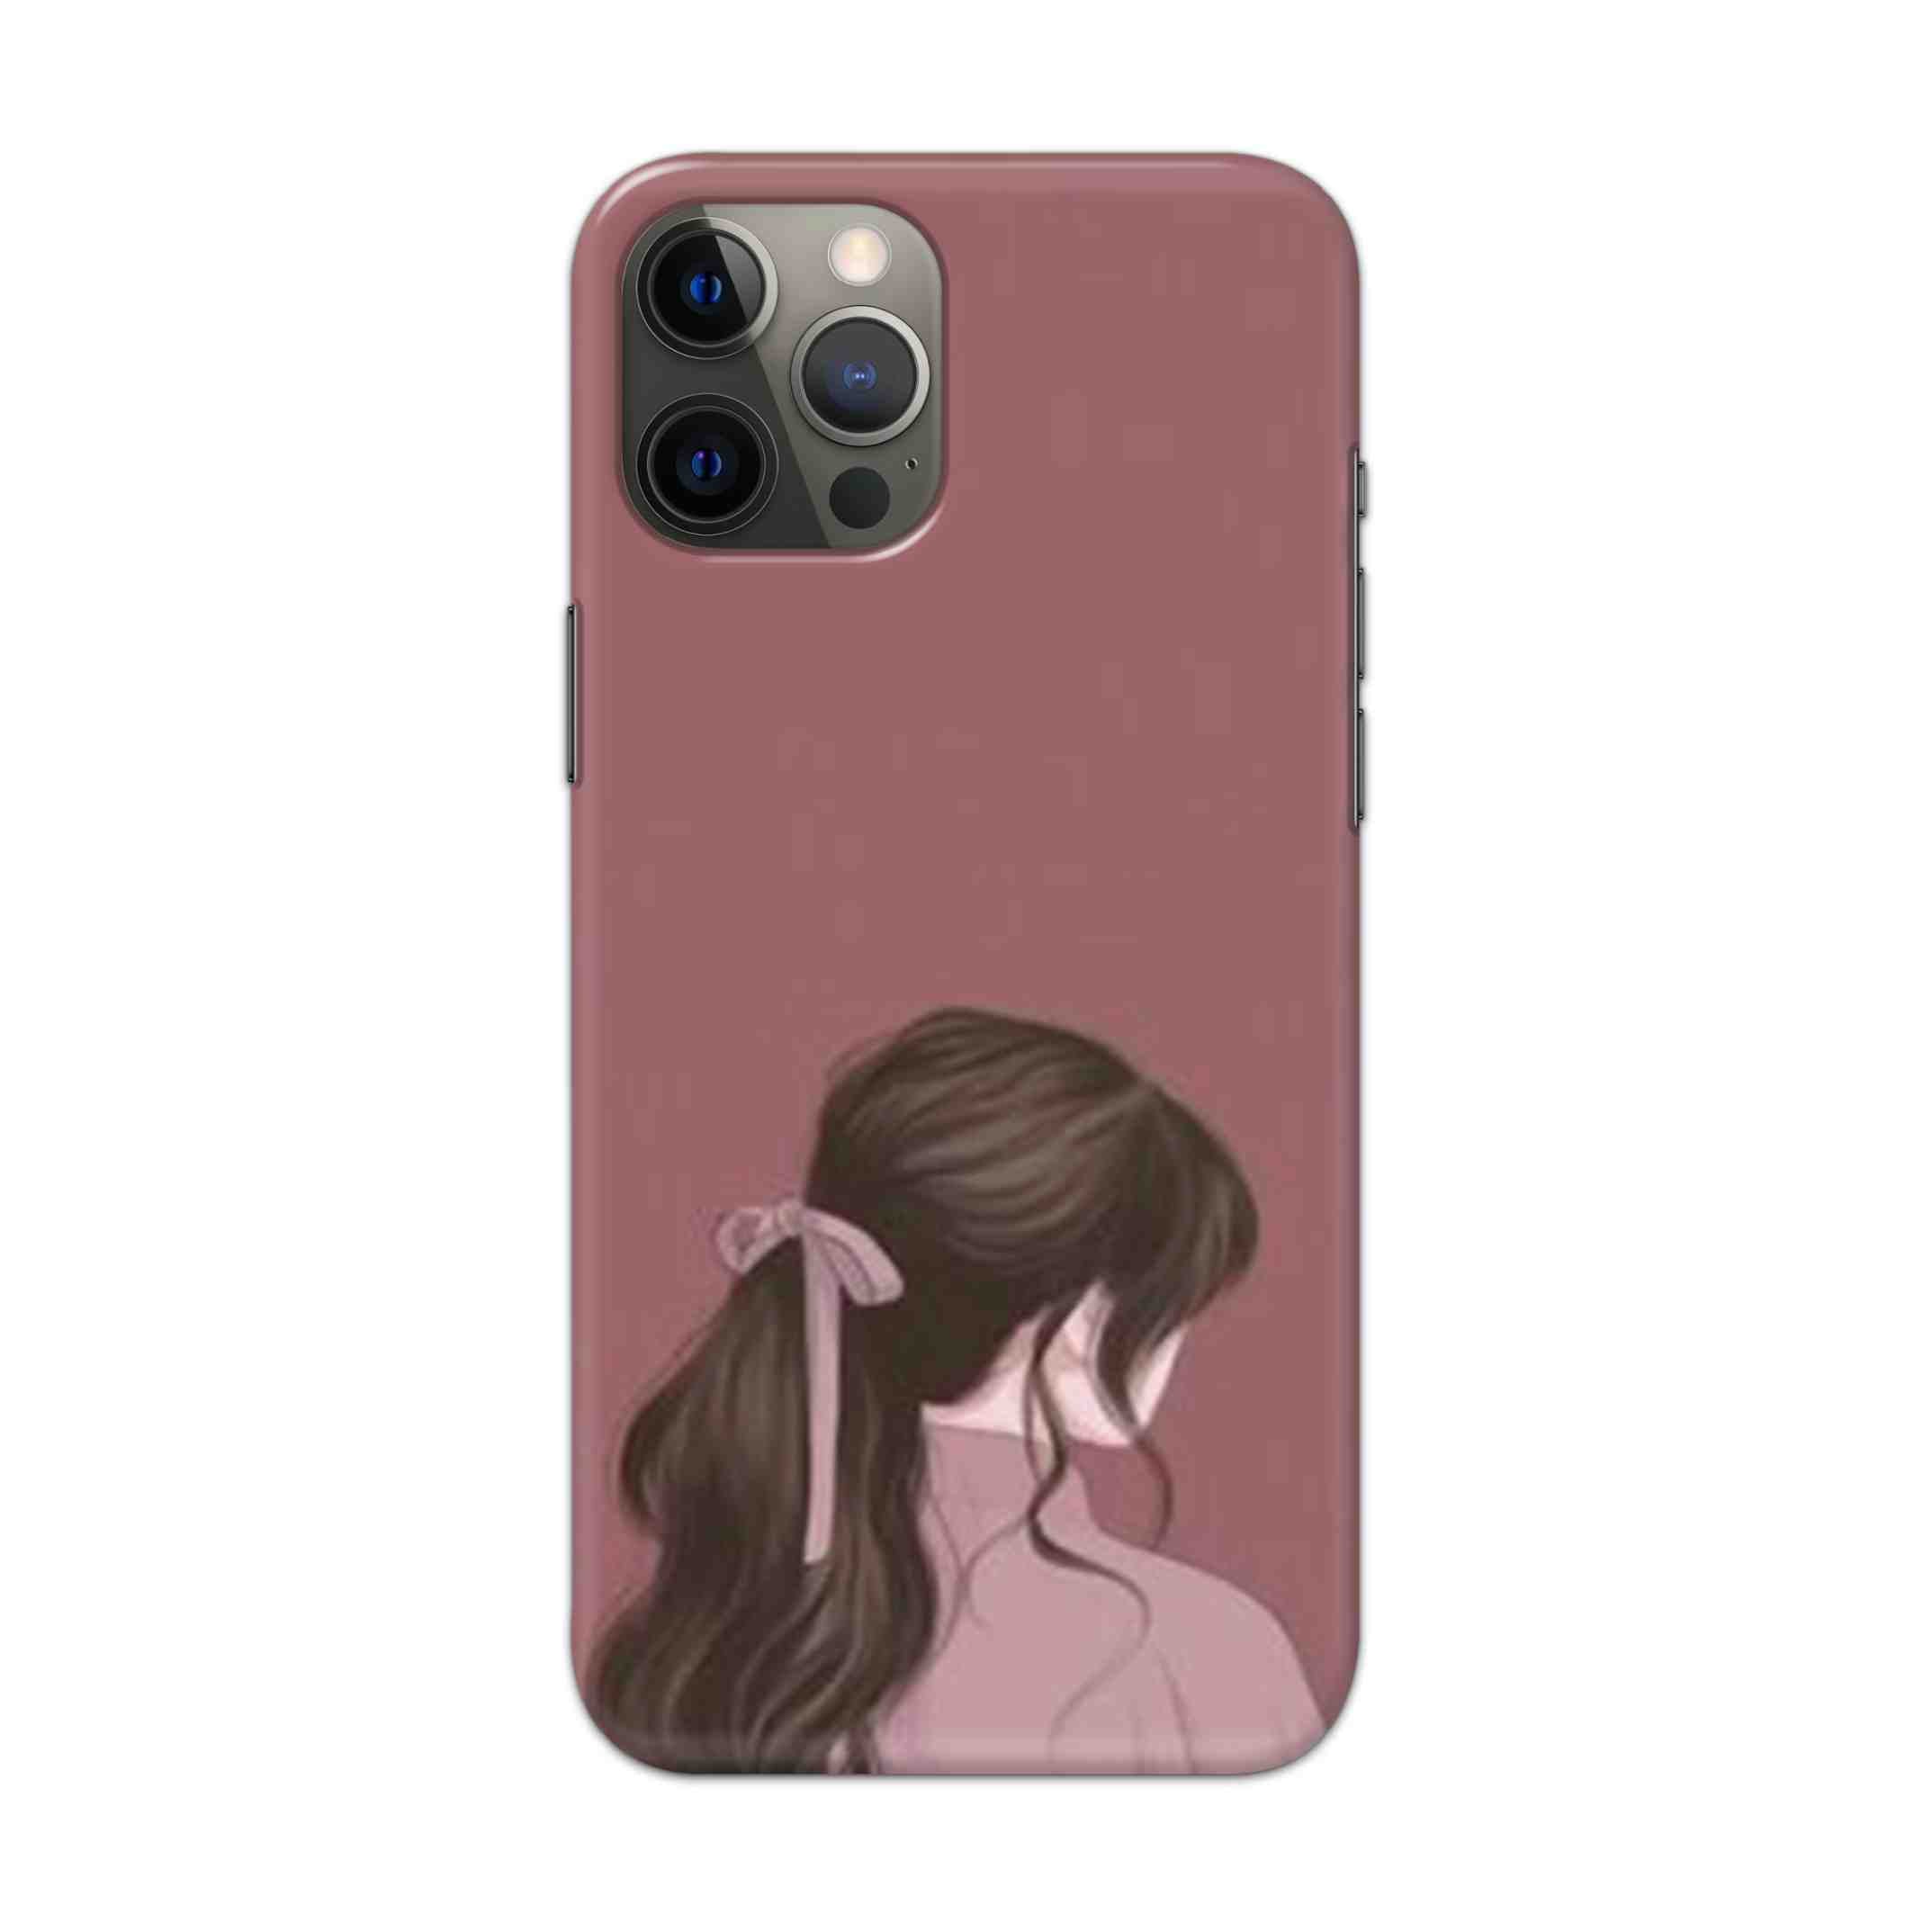 Buy Pink Girl Hard Back Mobile Phone Case Cover For Apple iPhone 12 pro max Online